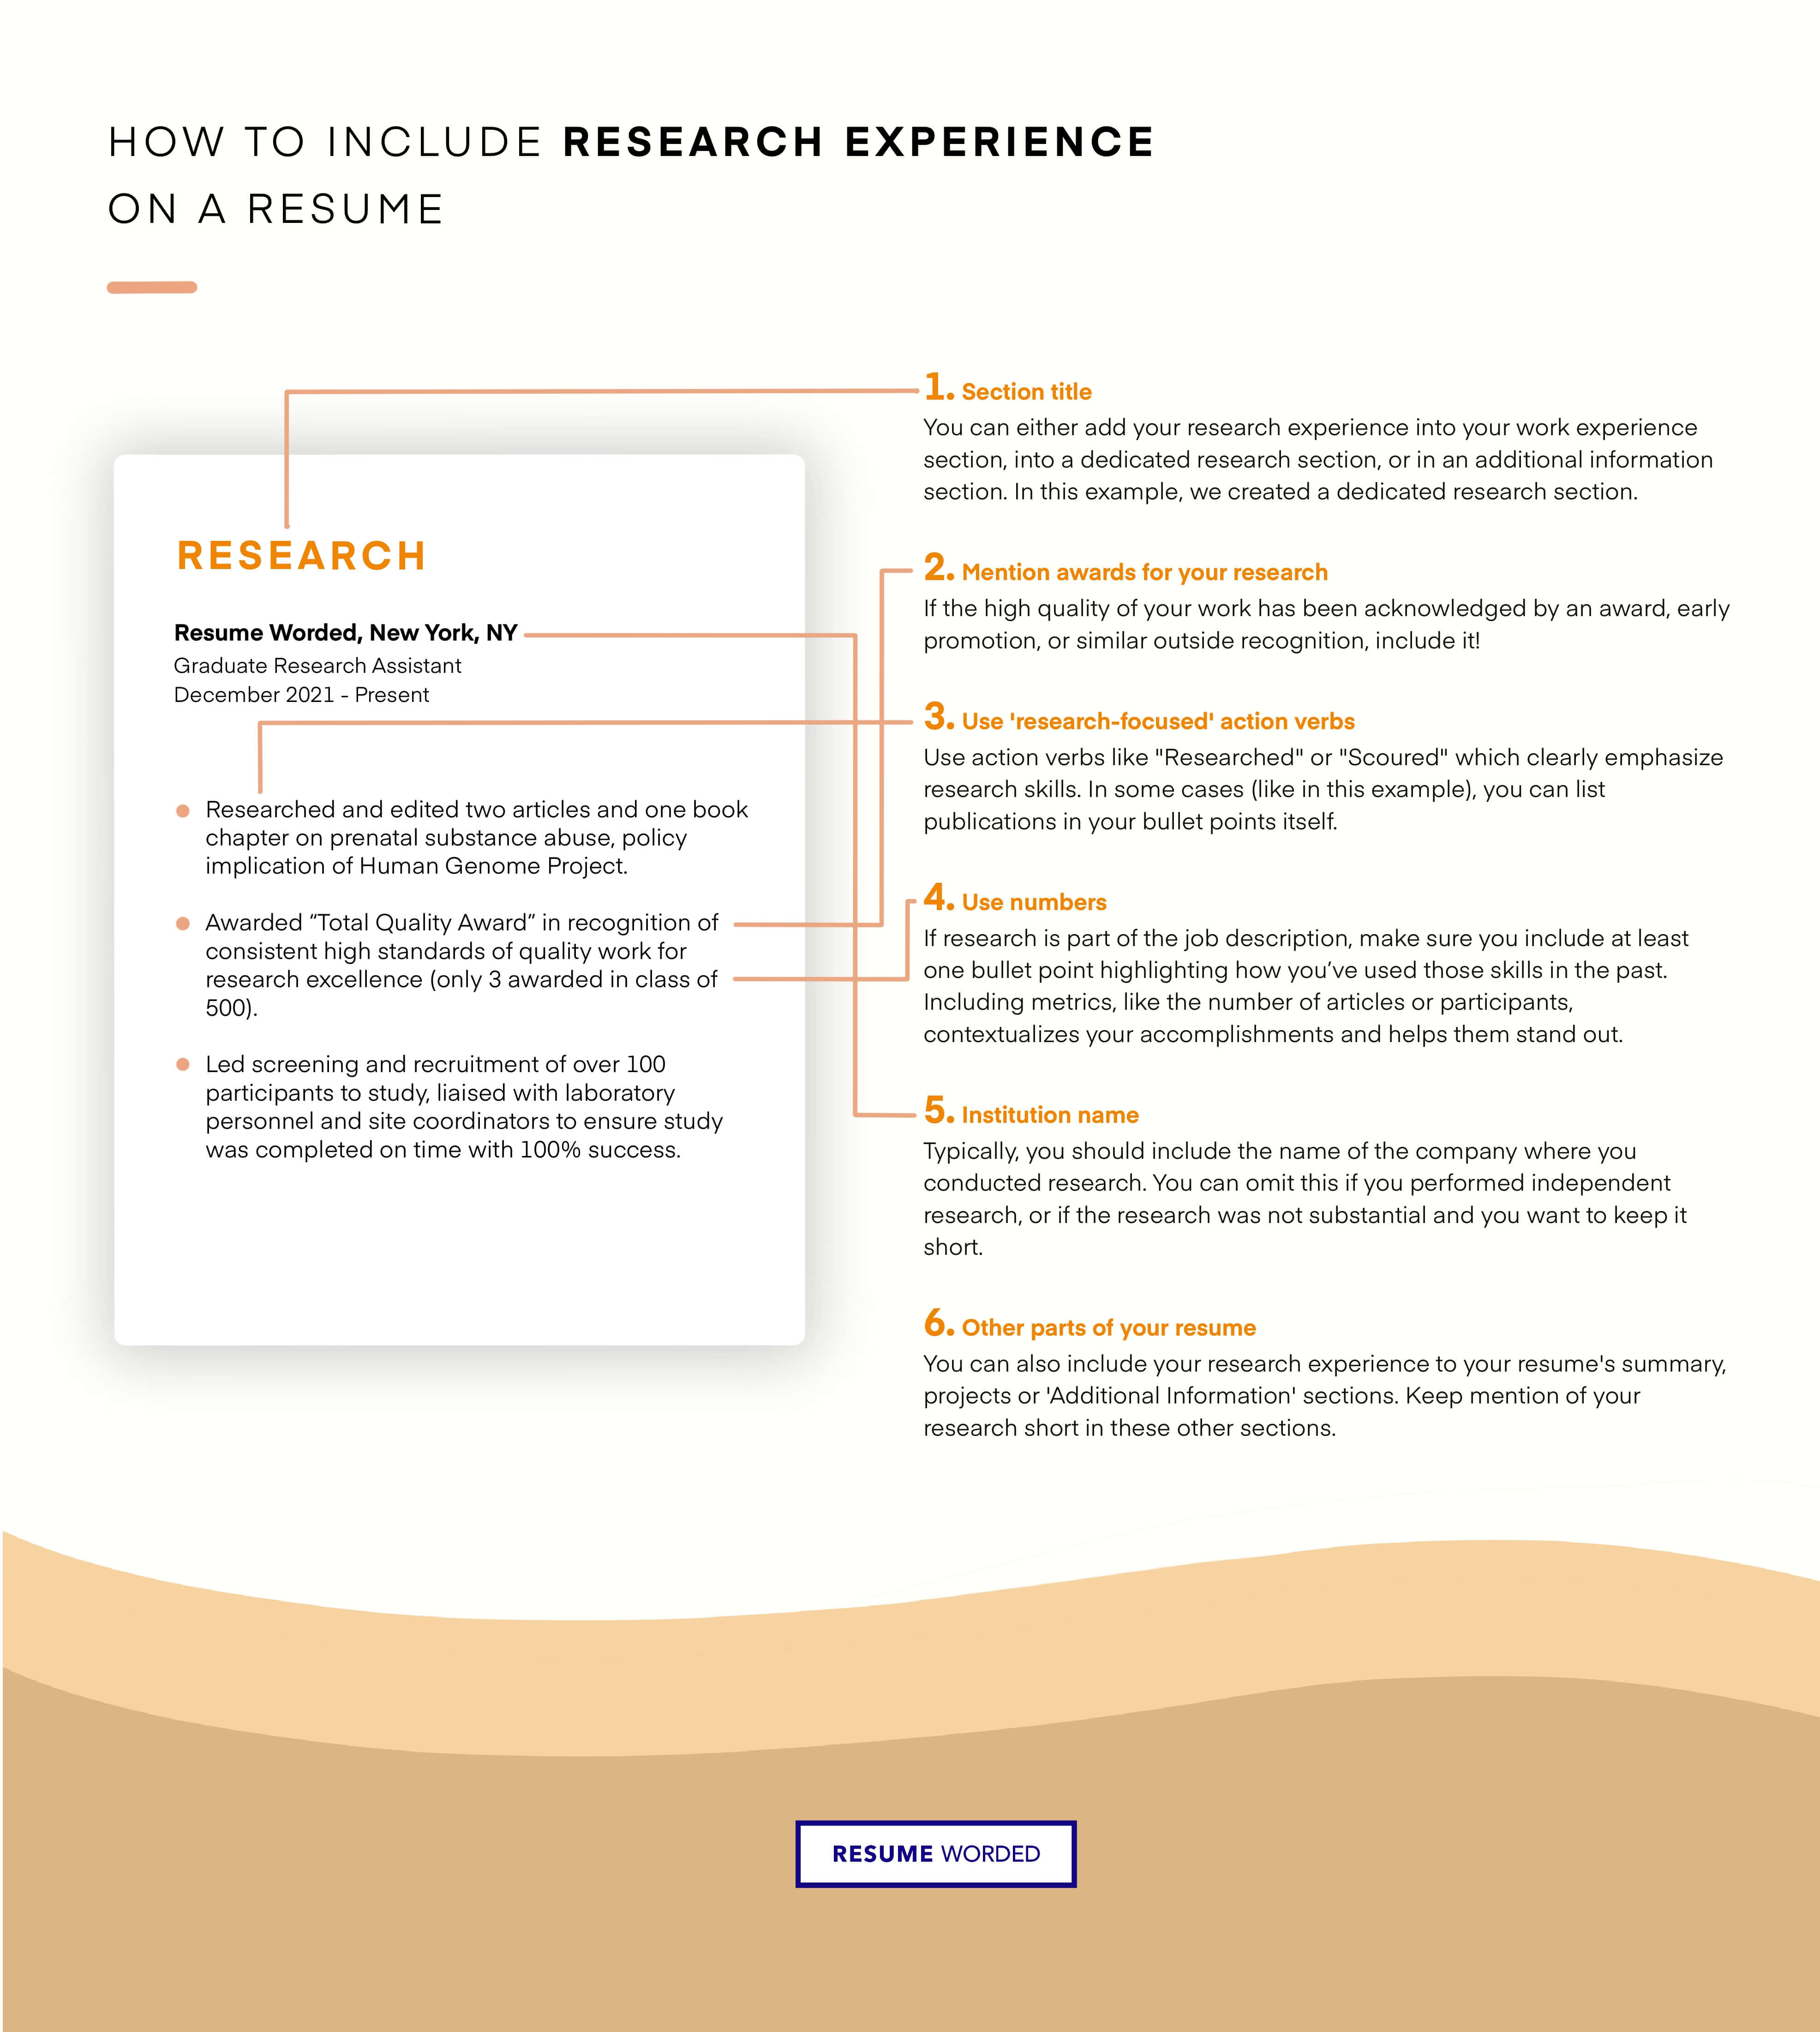 Show off your knowledge on the topic you will be researching - Entry Level Research Assistant Resume